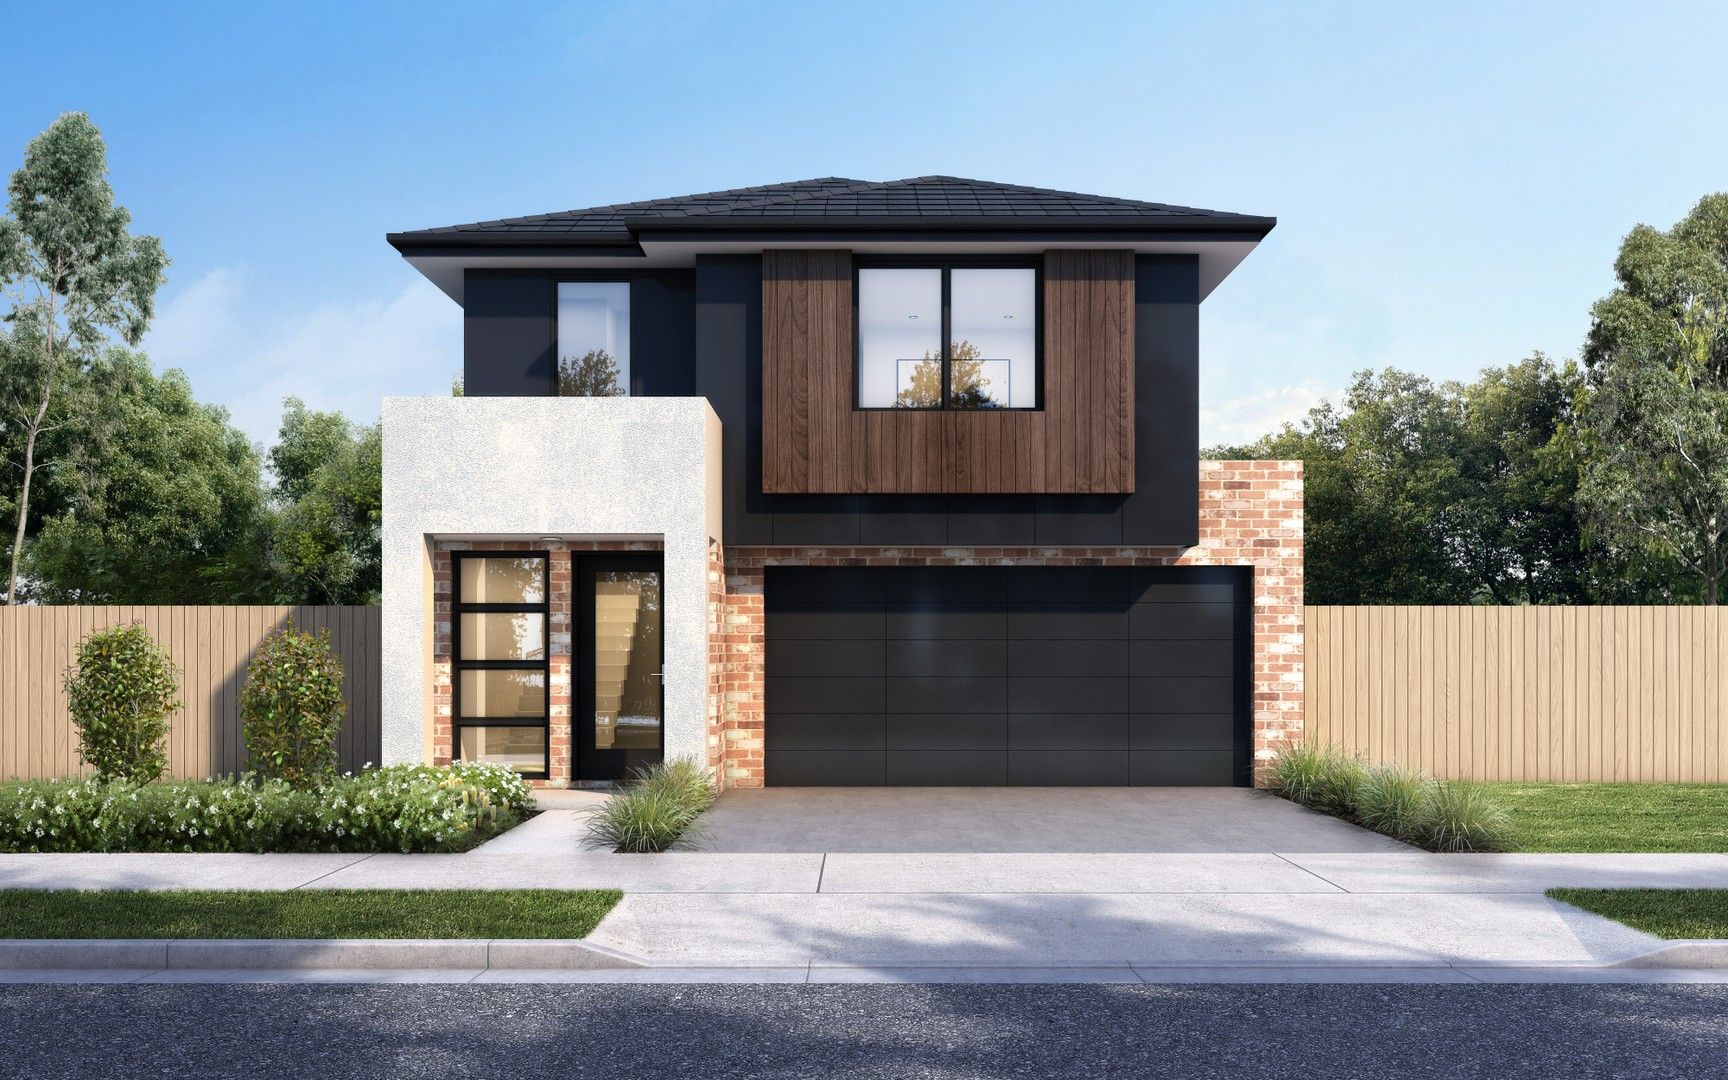 4 bedrooms New House & Land in Lot 118 Belgravia Avenue GLEDSWOOD HILLS NSW, 2557